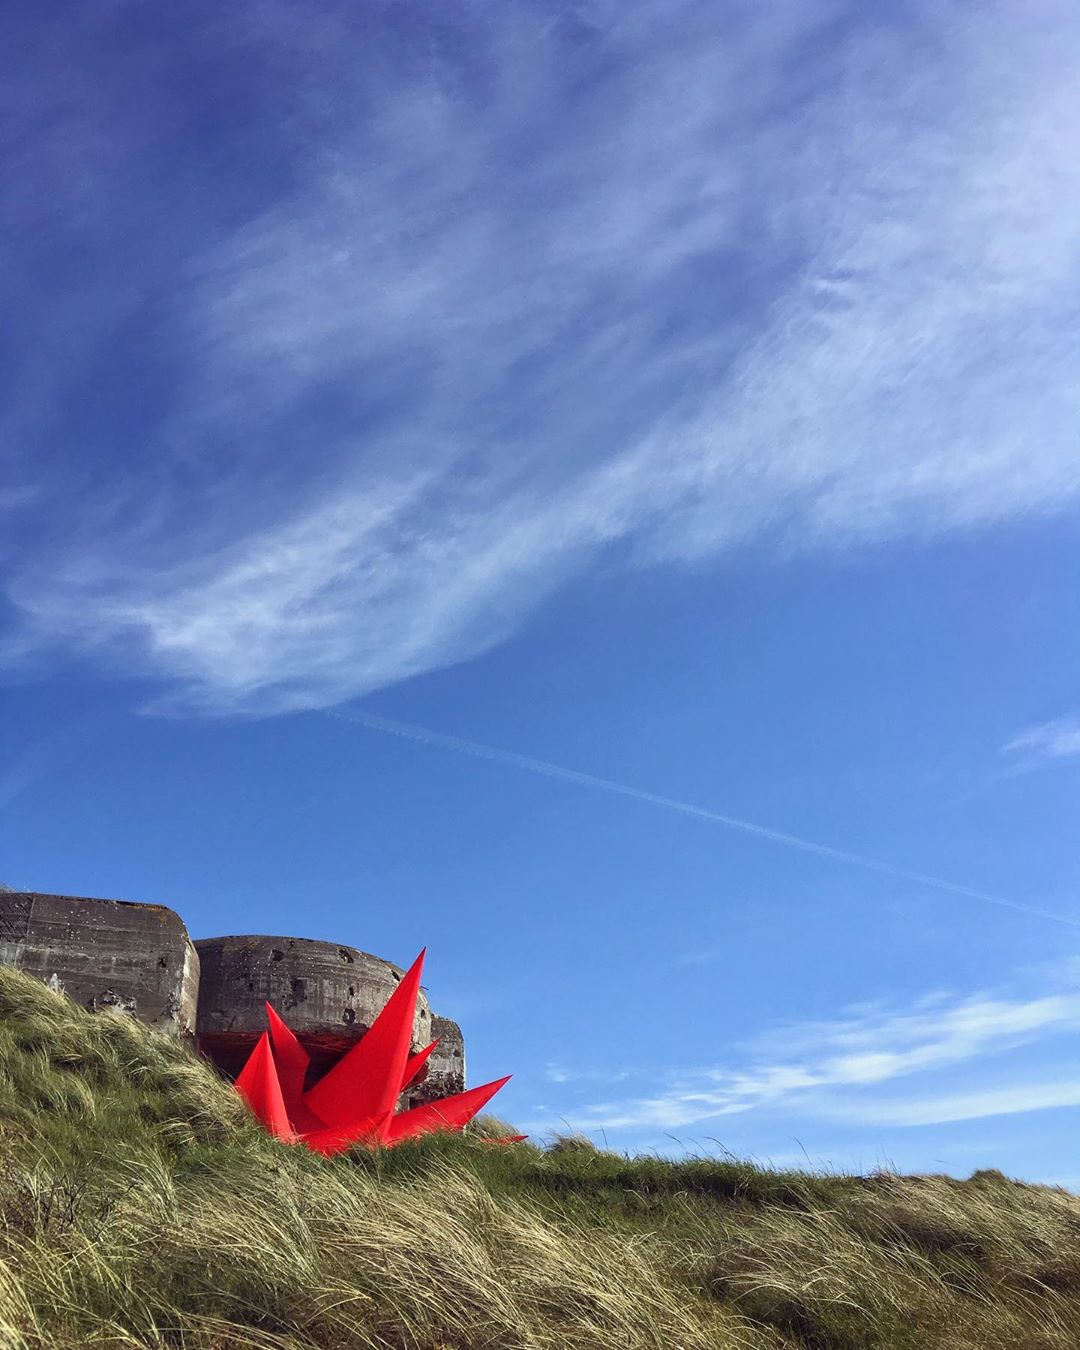 Steve Messam: Watched #3